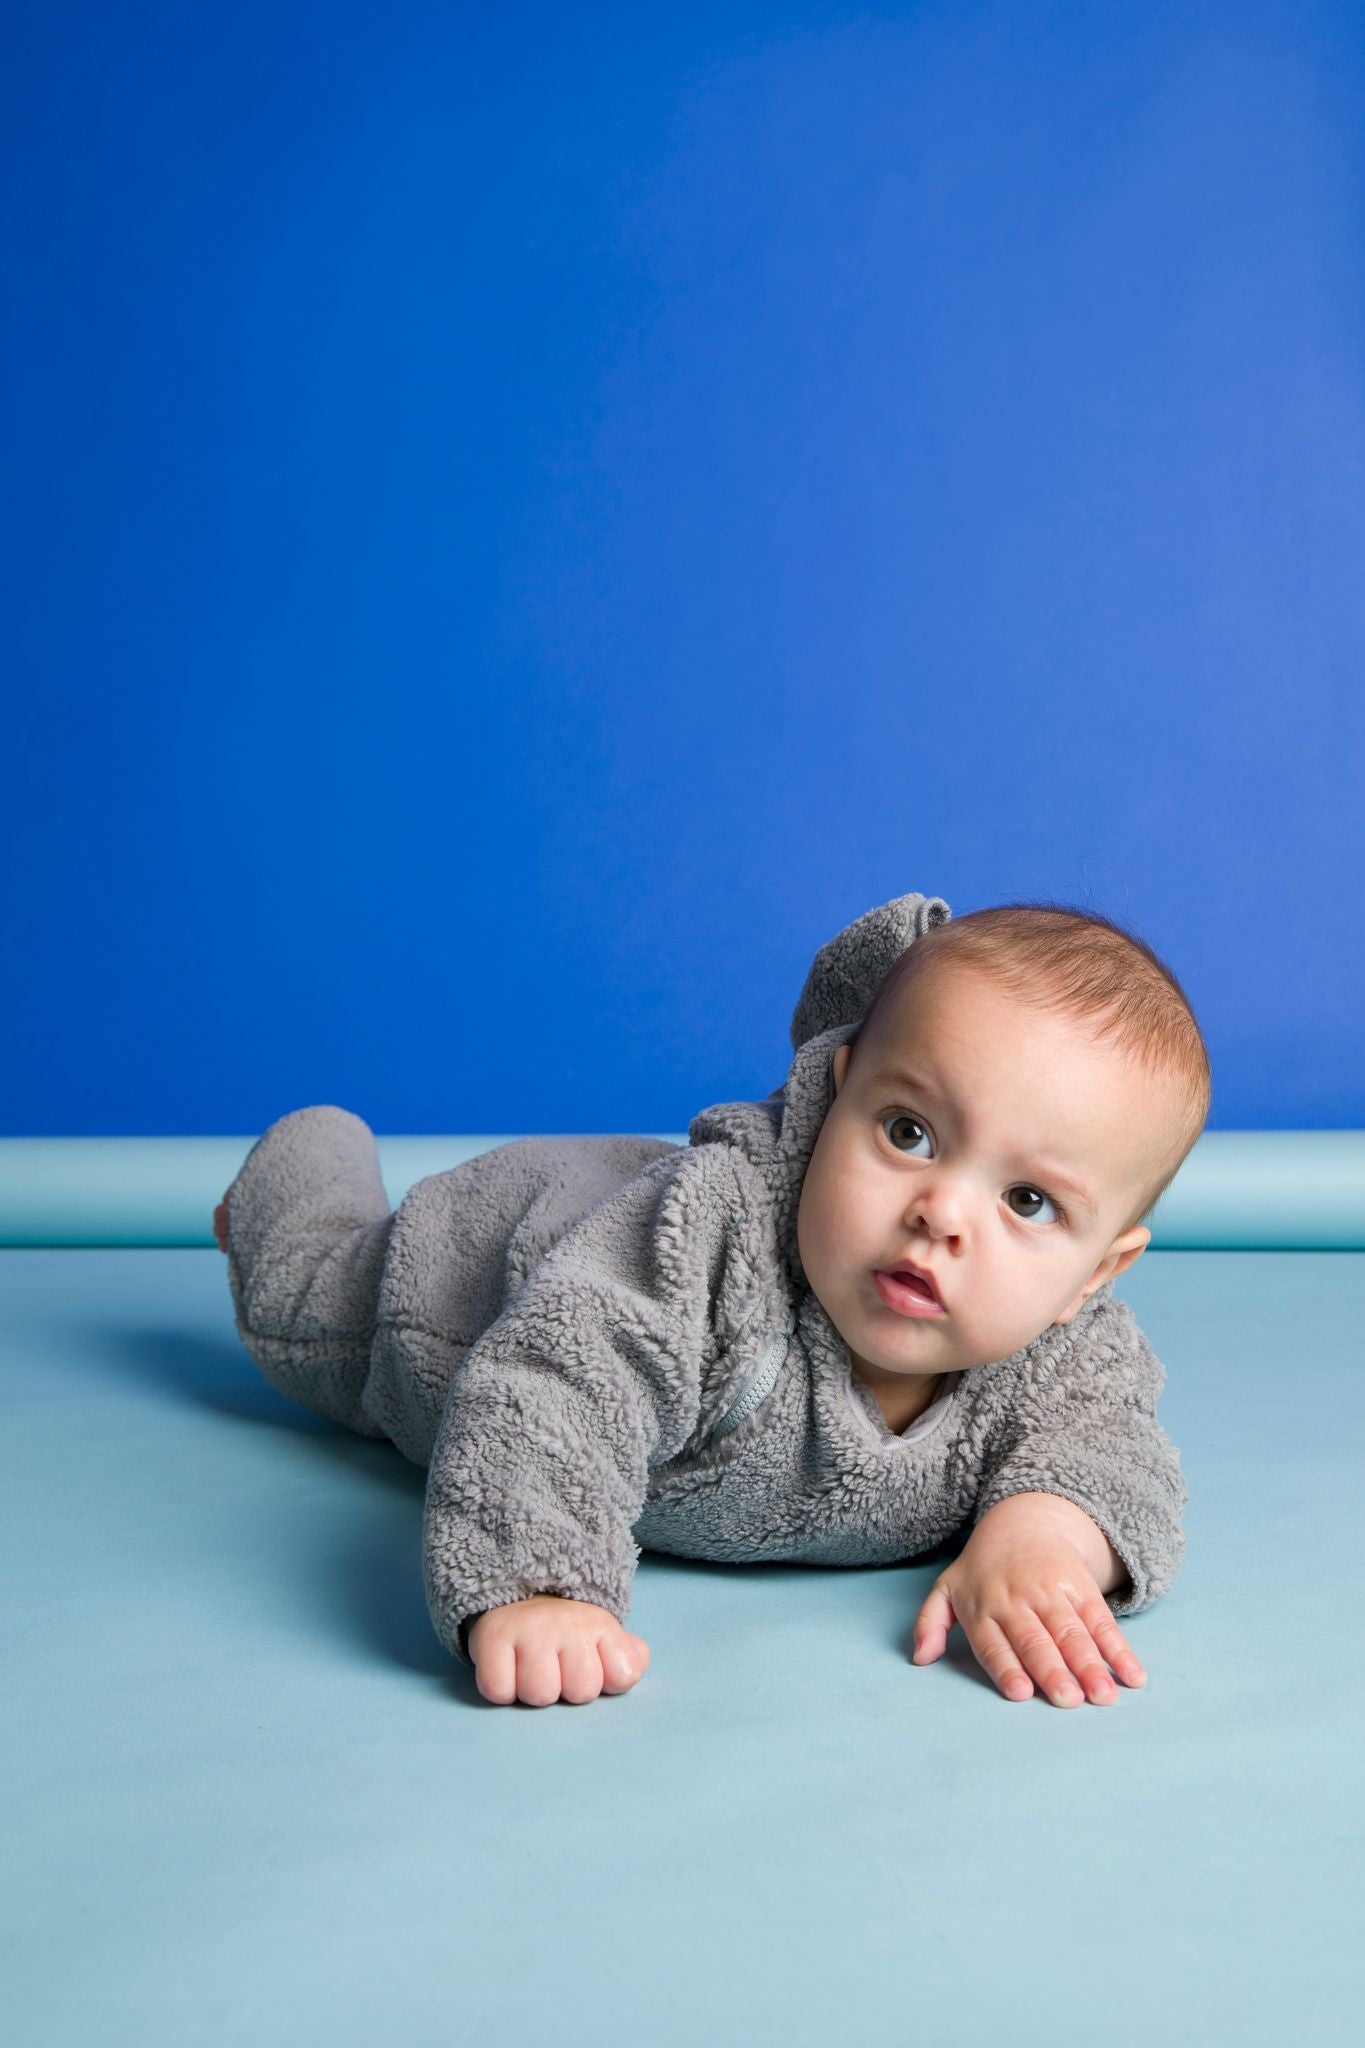 Baby Not Crawling? Here’s What To Do